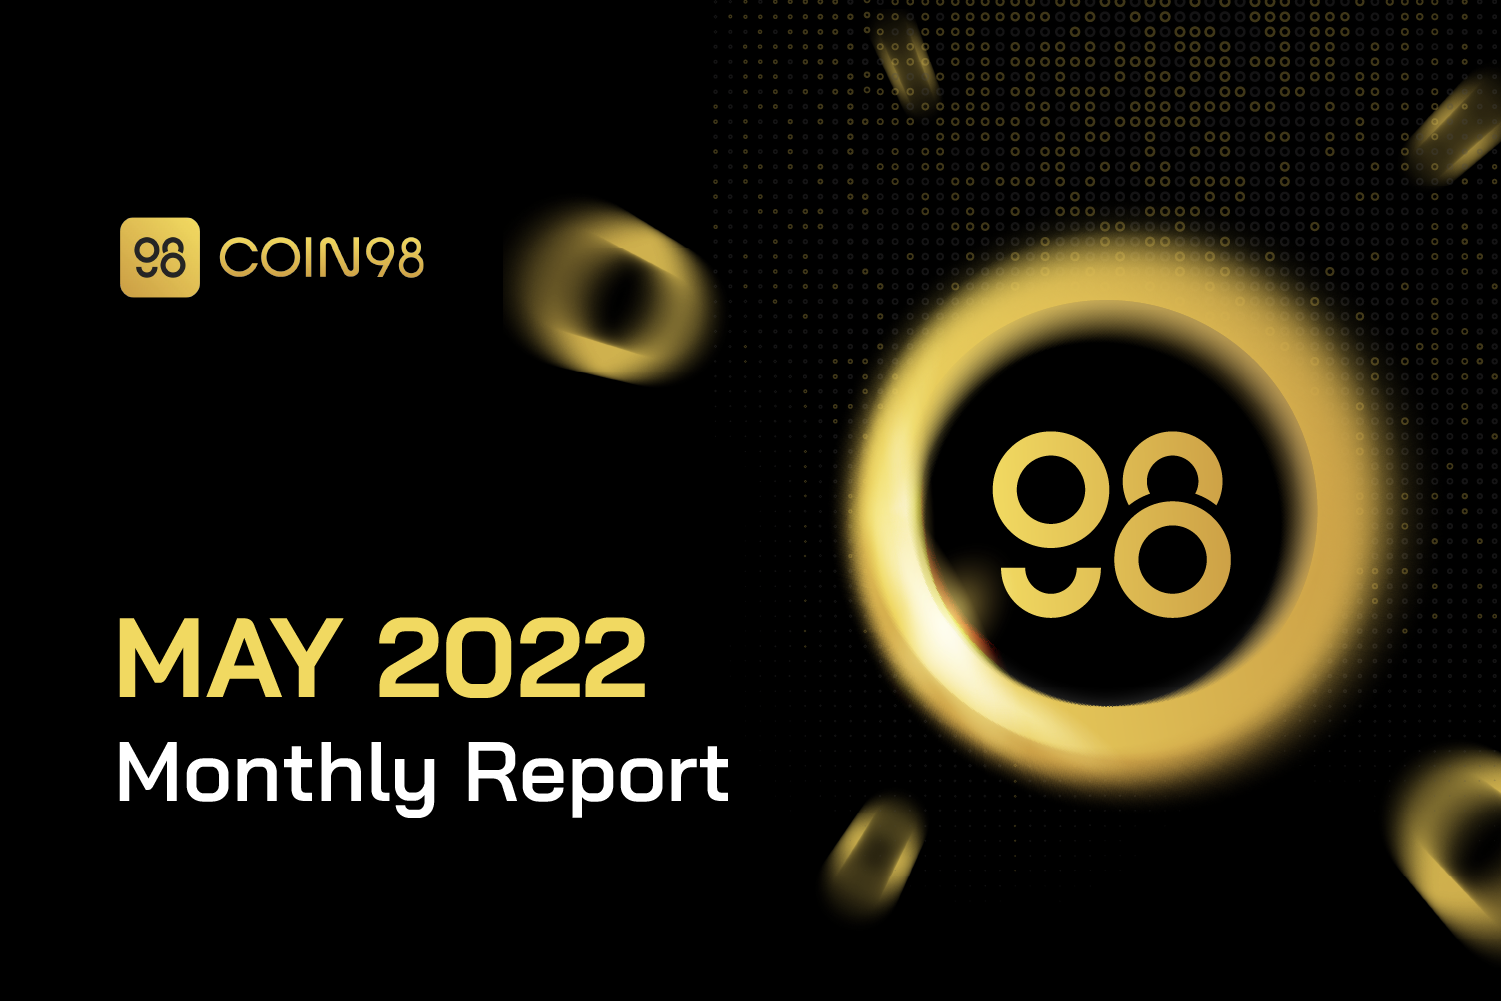 Coin98 Super App May 2022 | Highlights and Milestones